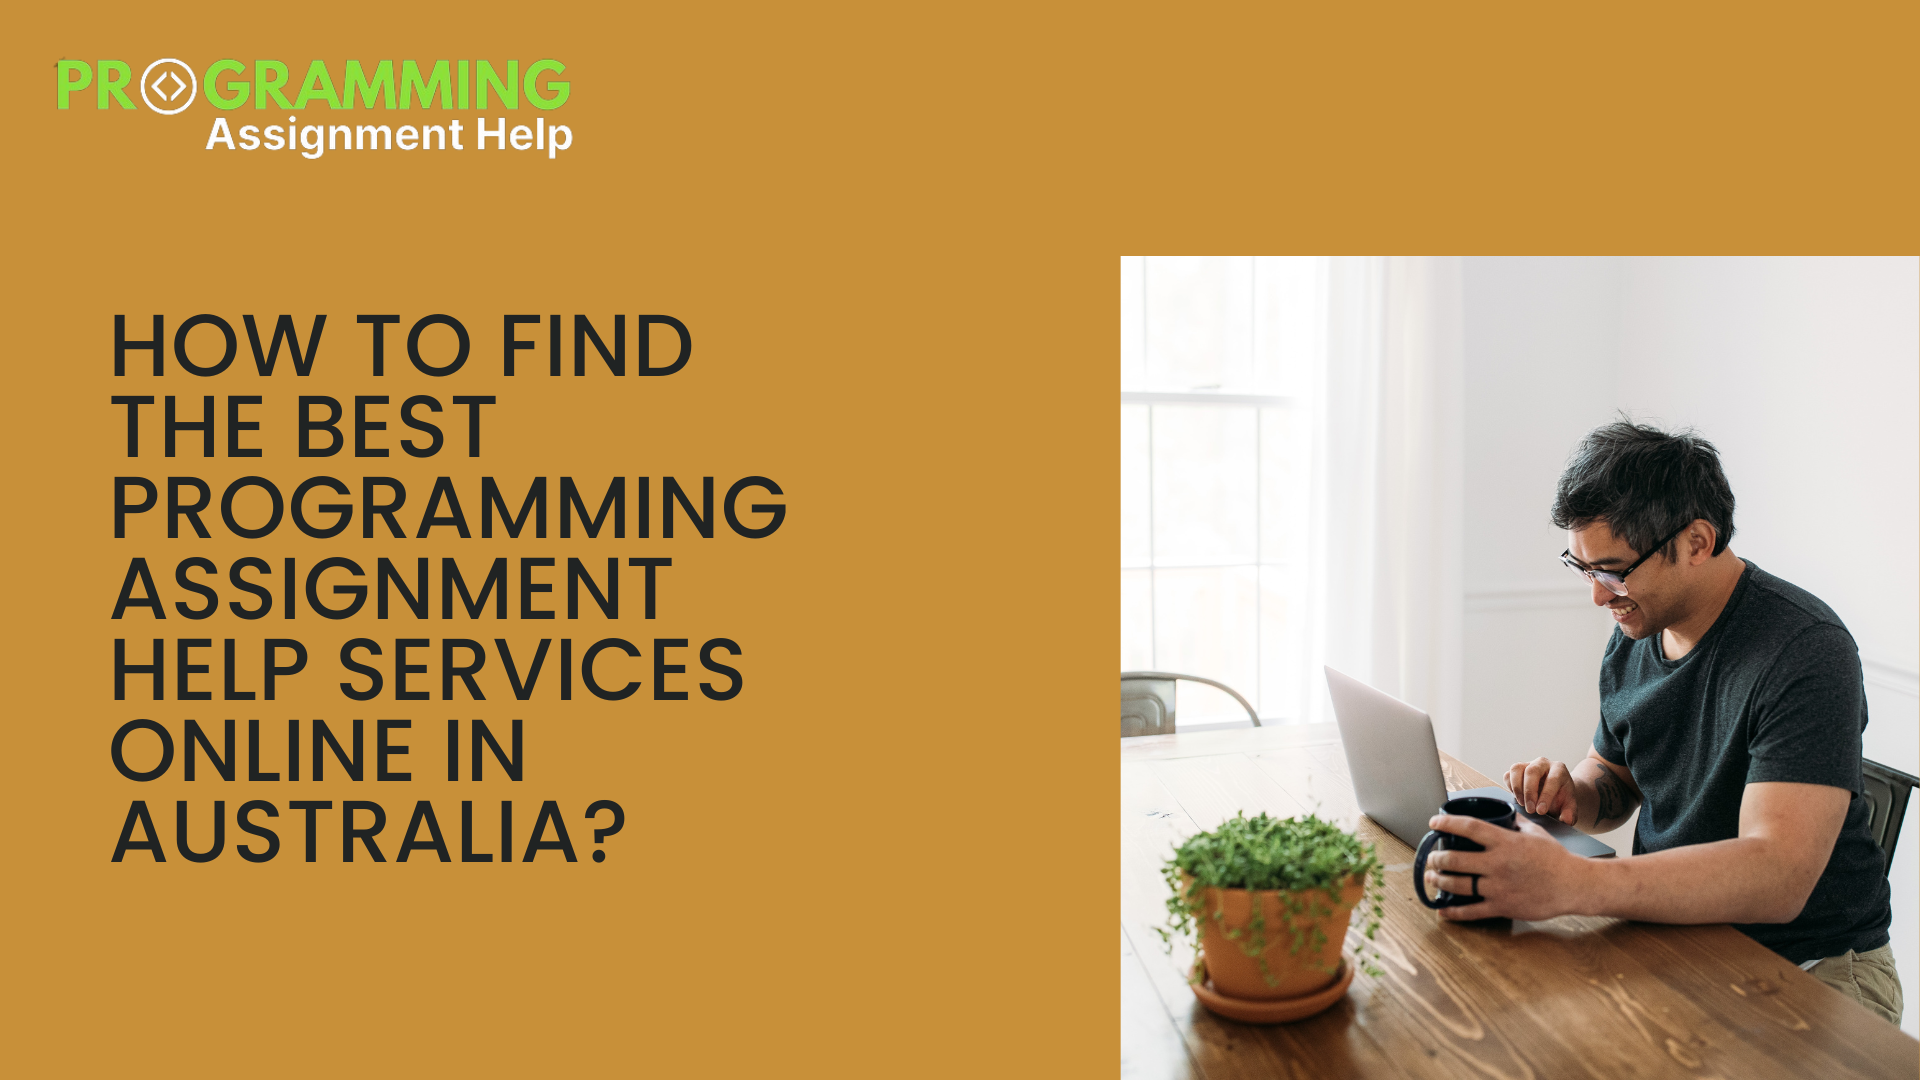 How To Find the Best Programming Assignment Help Services Online in Australia?